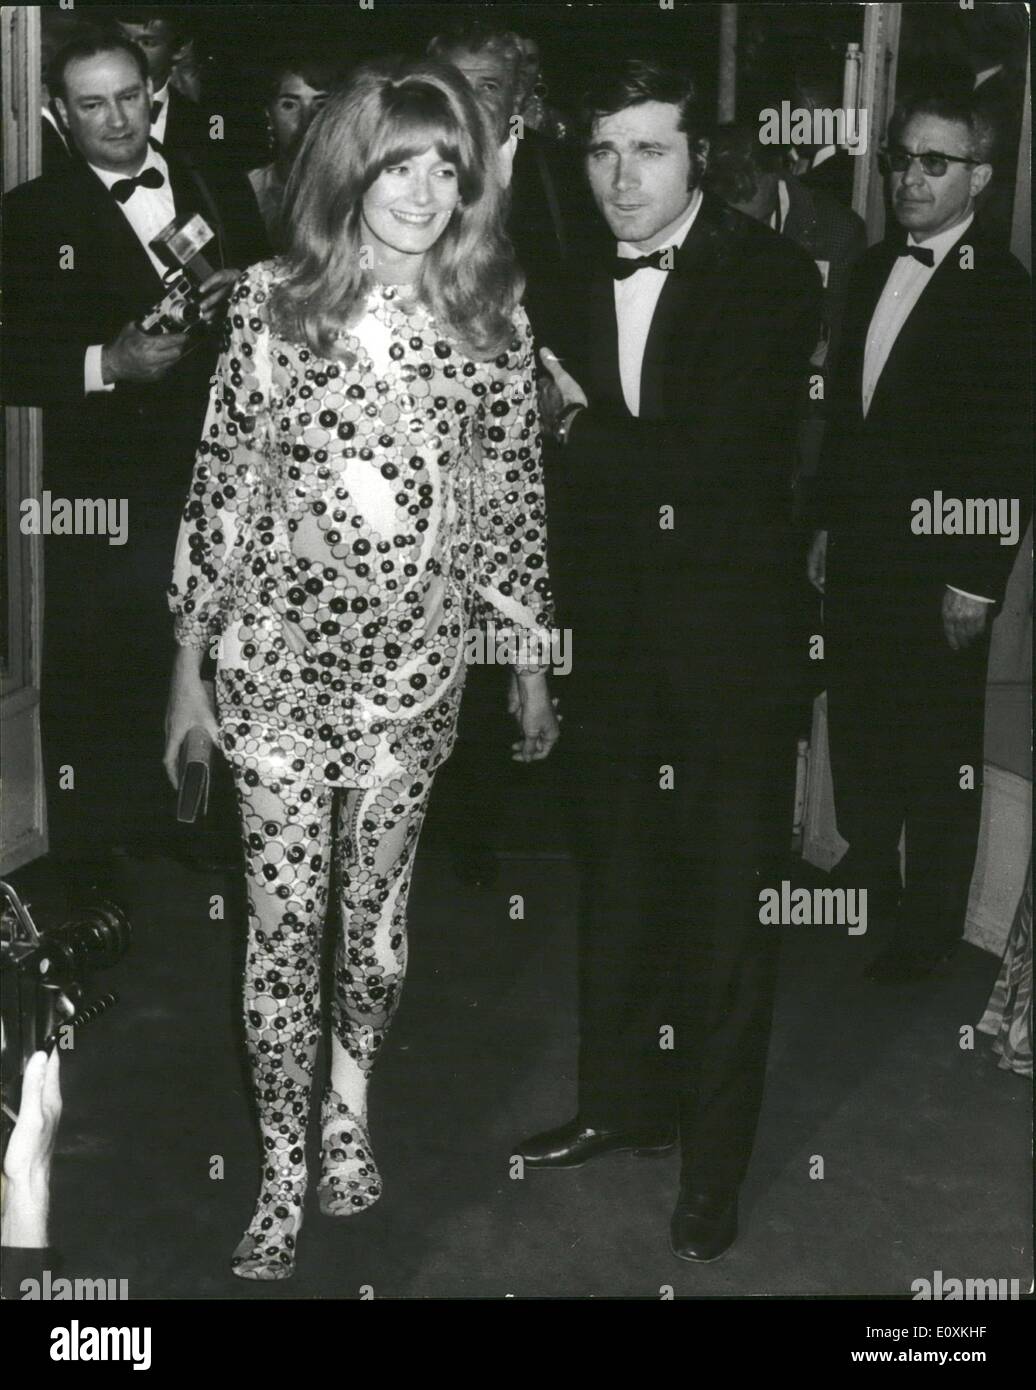 May 05, 1967 - 12-5-67 Cannes Film Festival. hoto Shows: English actress Vanessa Redgrave wore this striking outfit wh Stock Photo